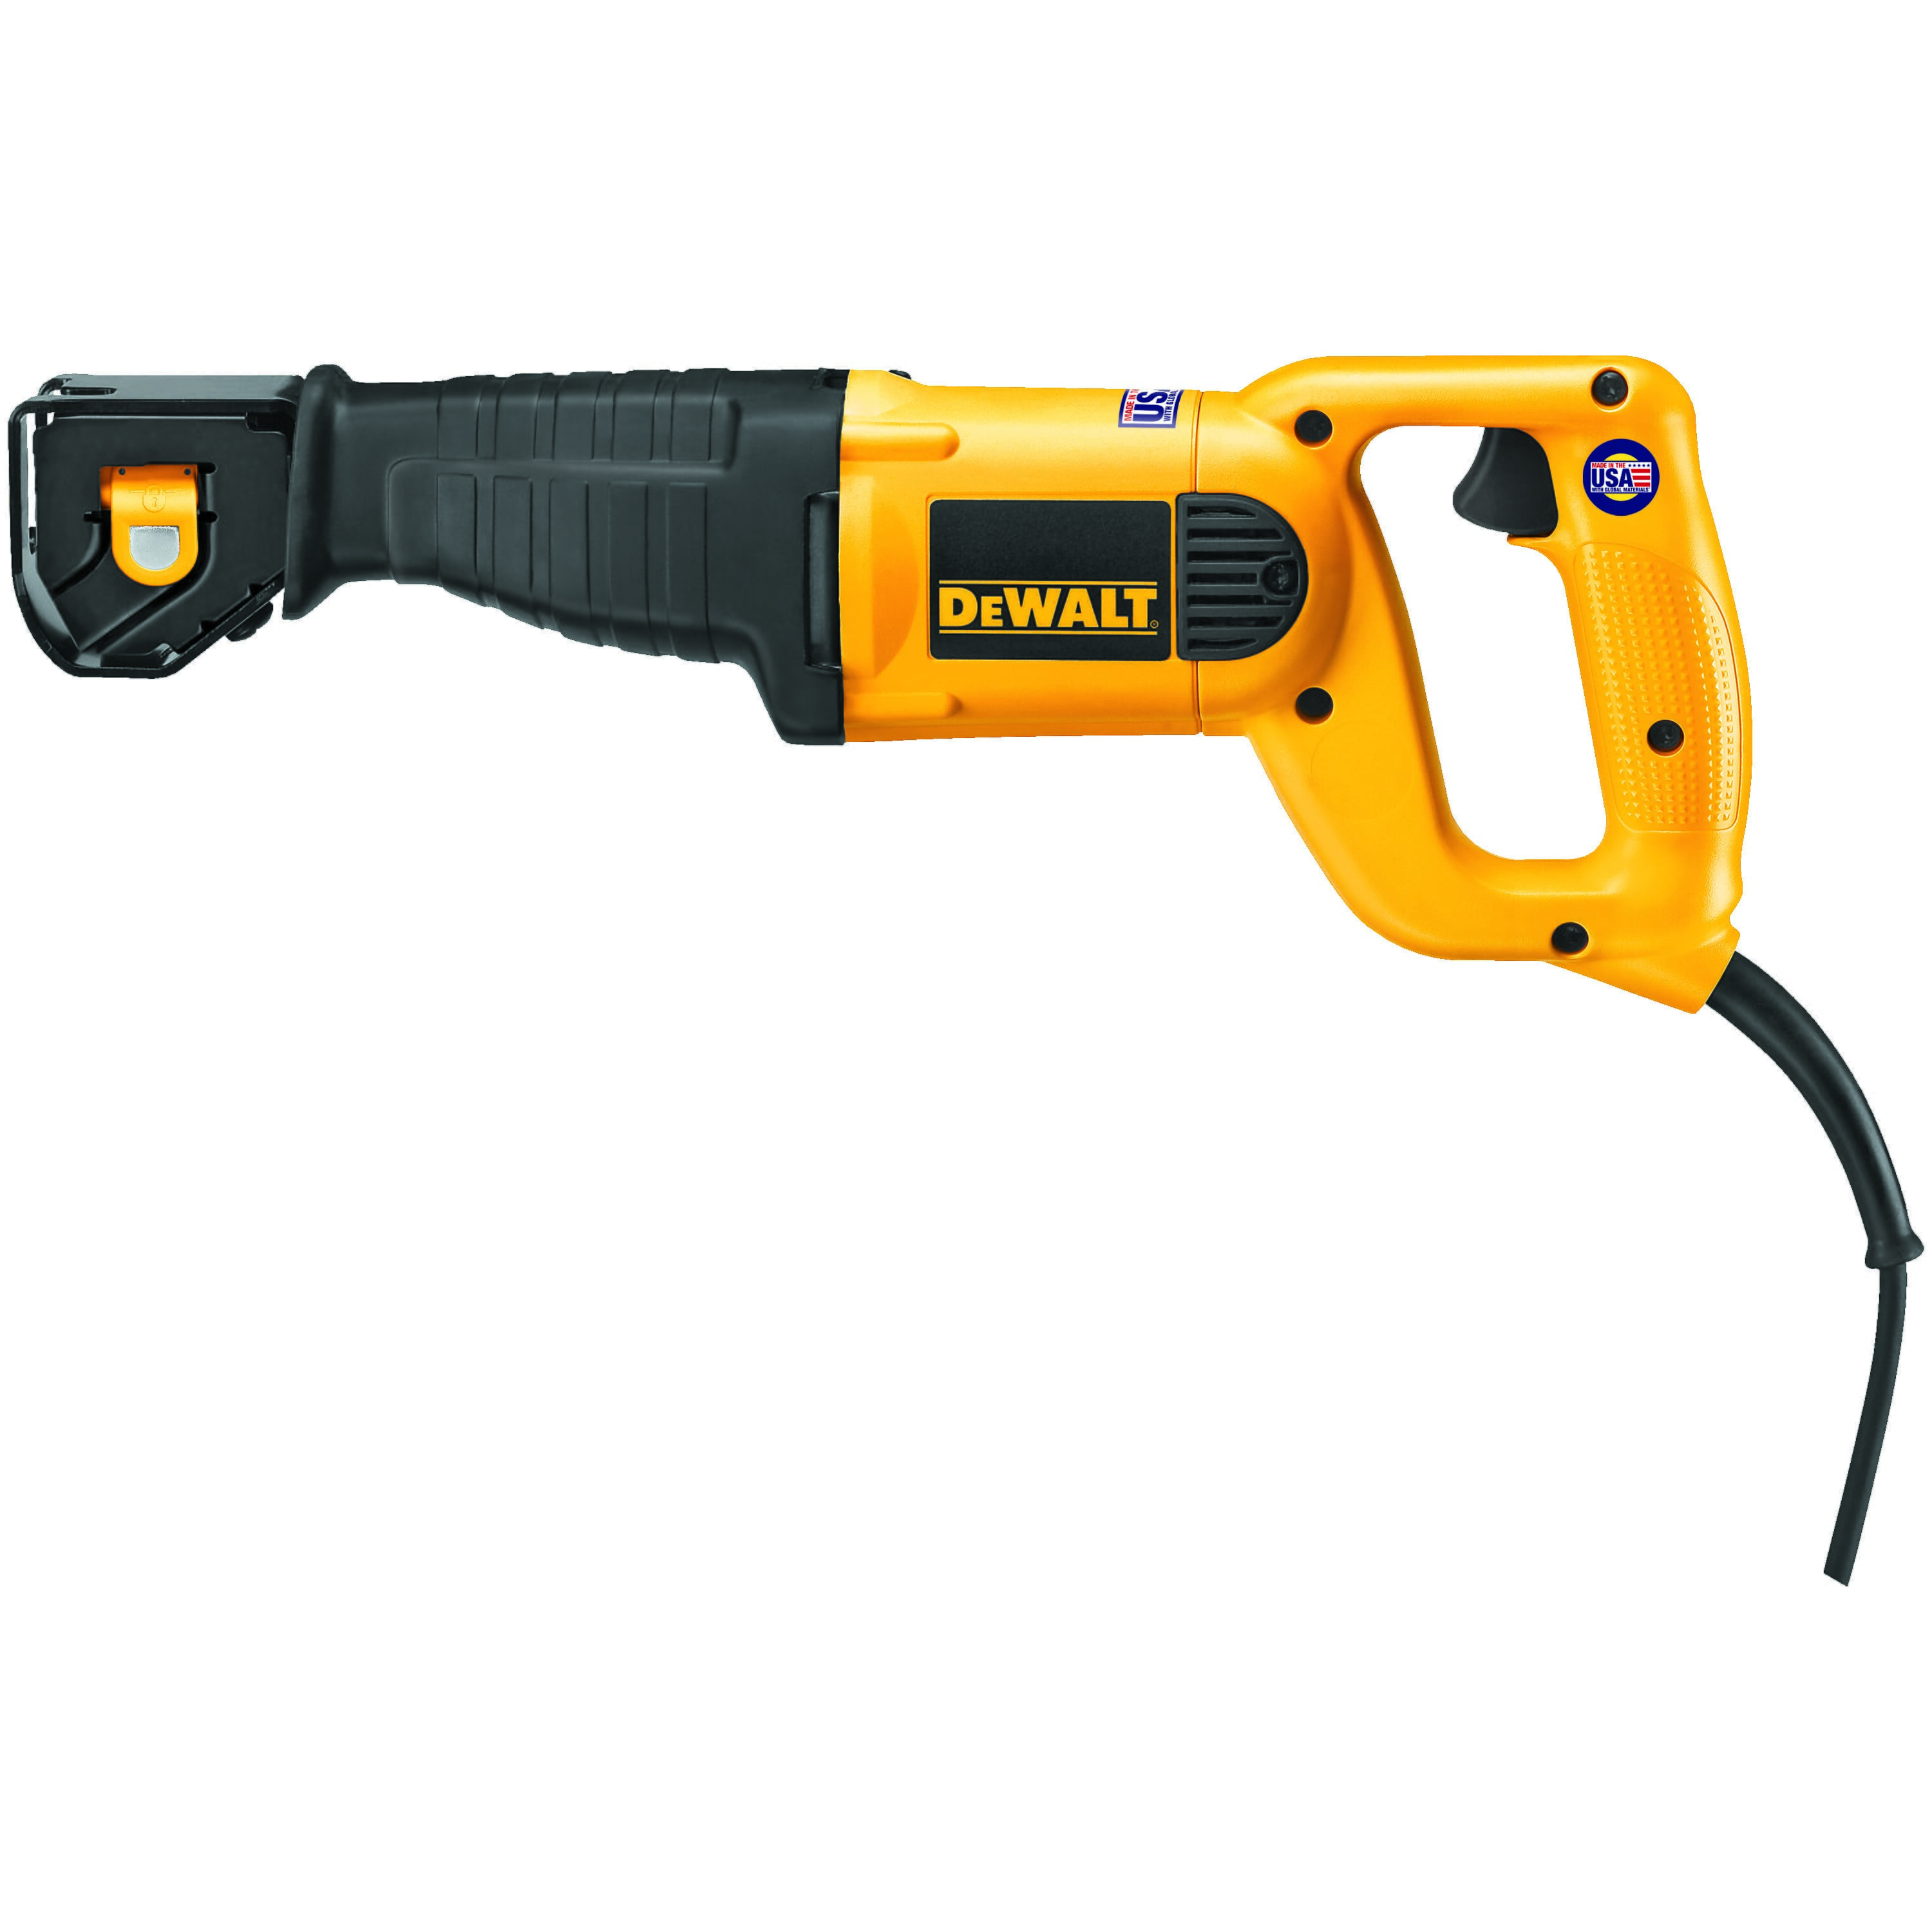 DeWALT DWE304 Corded Reciprocating Saw, 1-1/8 in L, 0 to 2800 spm, 17-1/2 in OAL, Tool Only